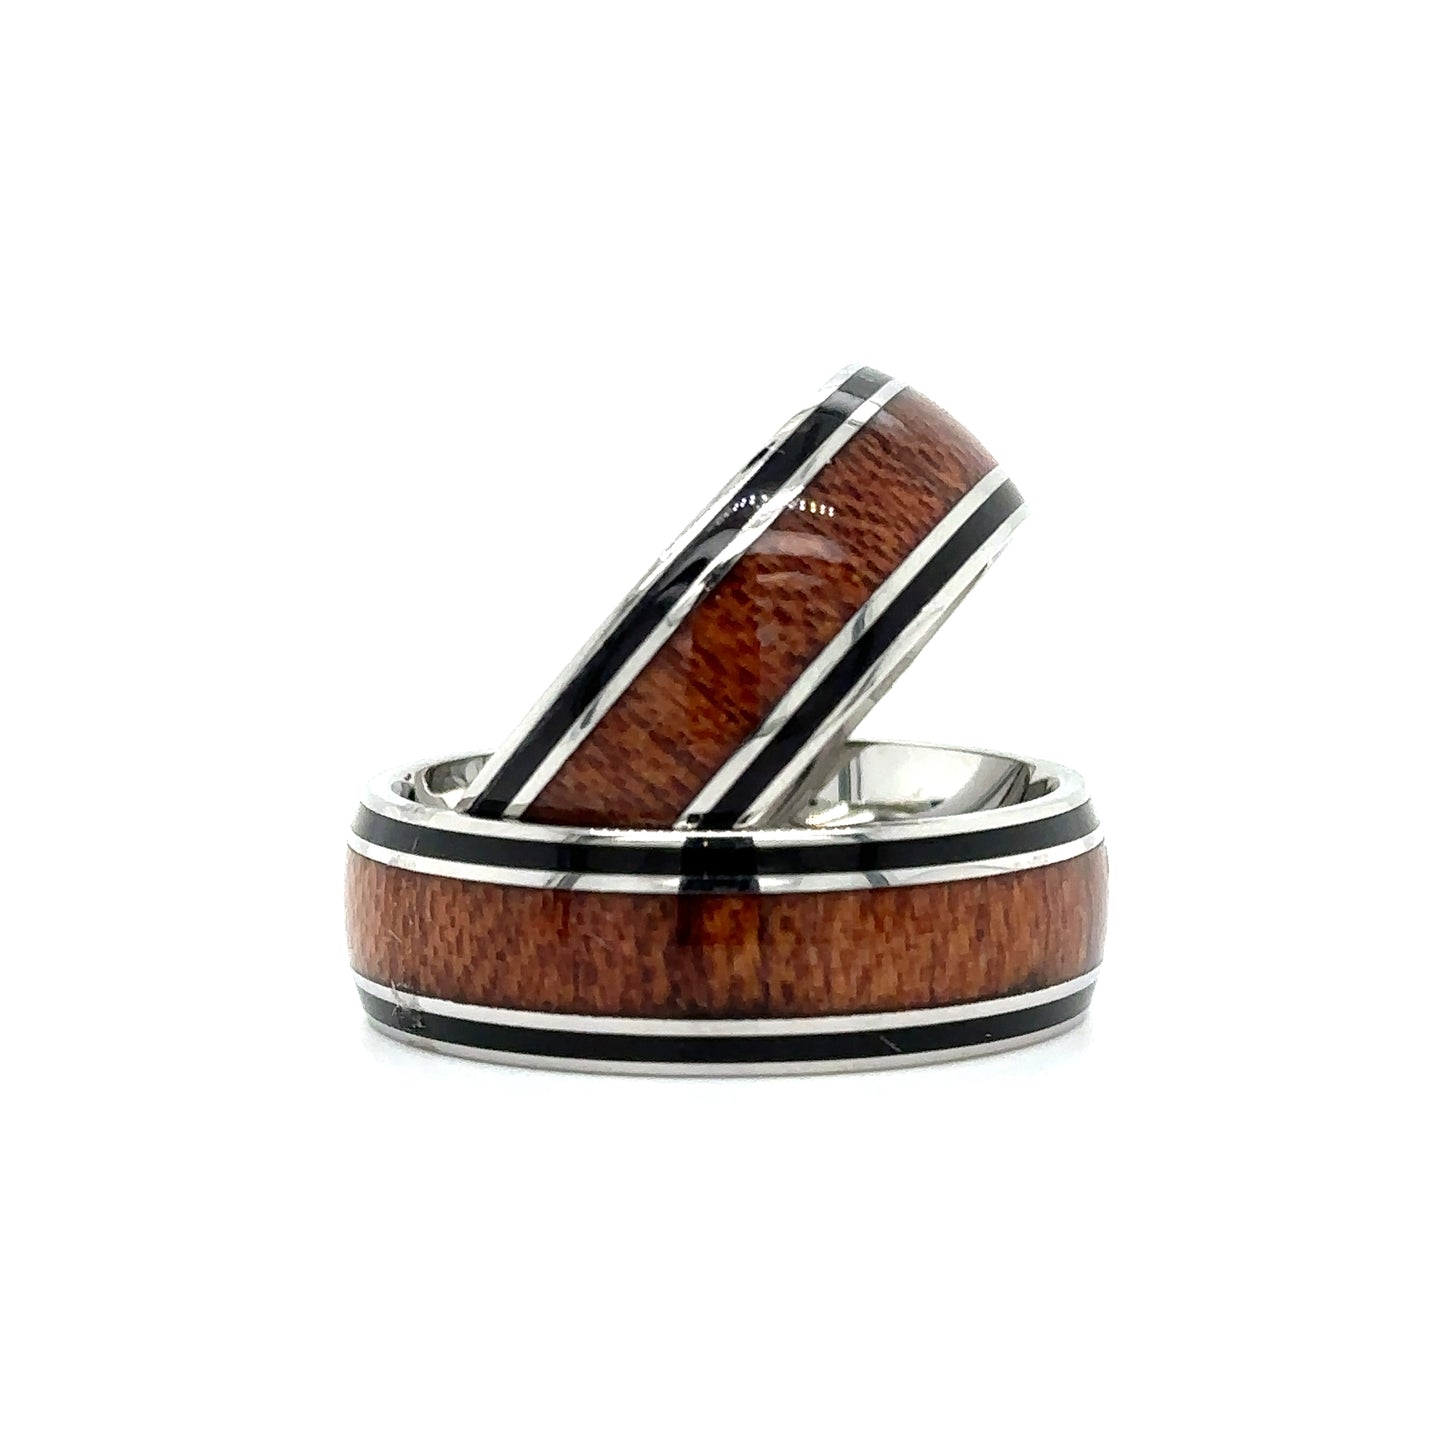 A pair of Super Silver Koa Wood Bands with Onyx Trim.